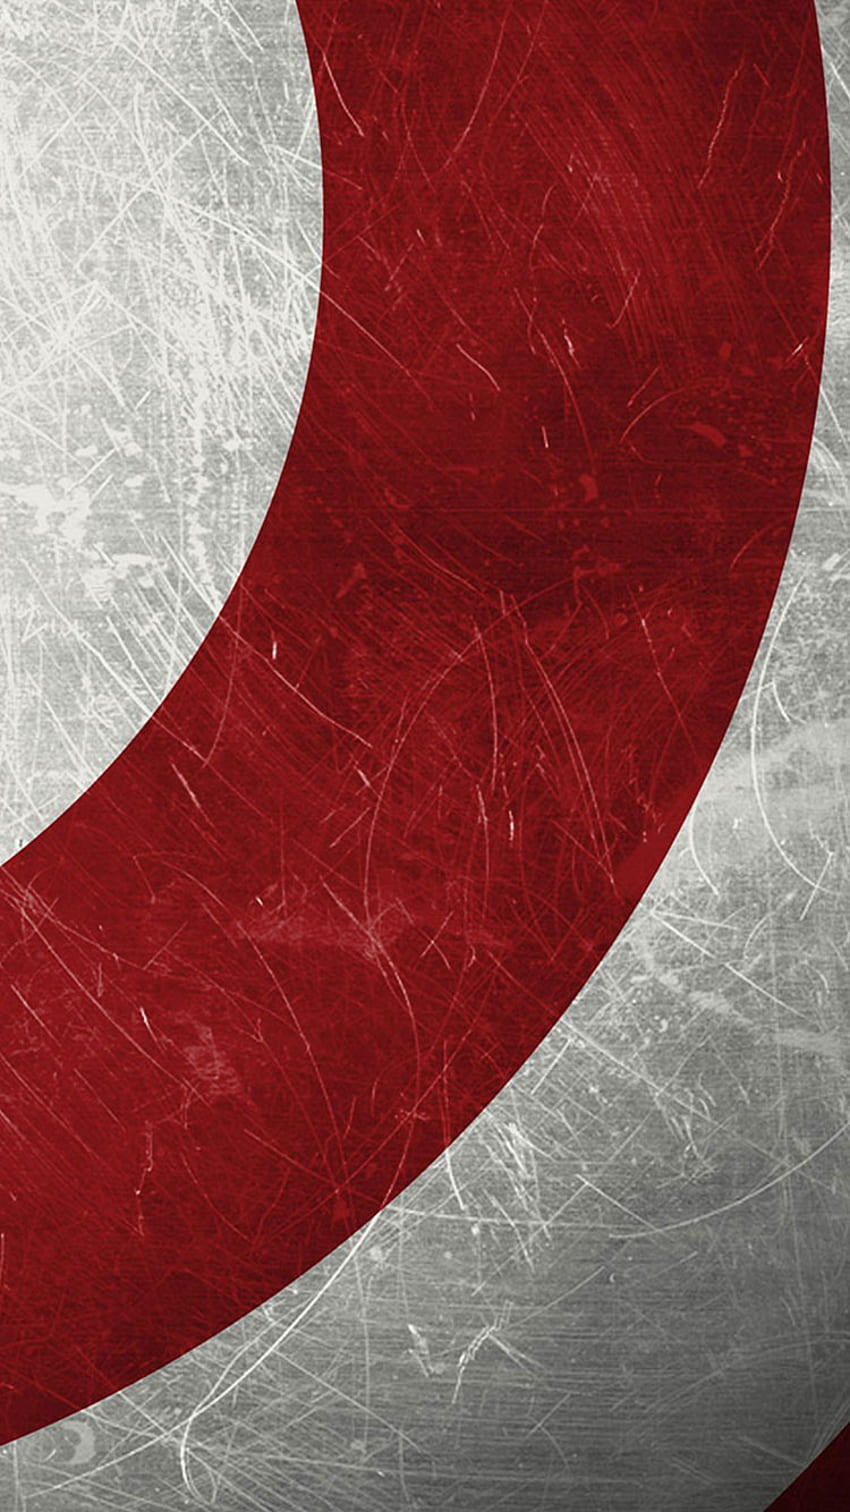 red and white iphone wallpaper